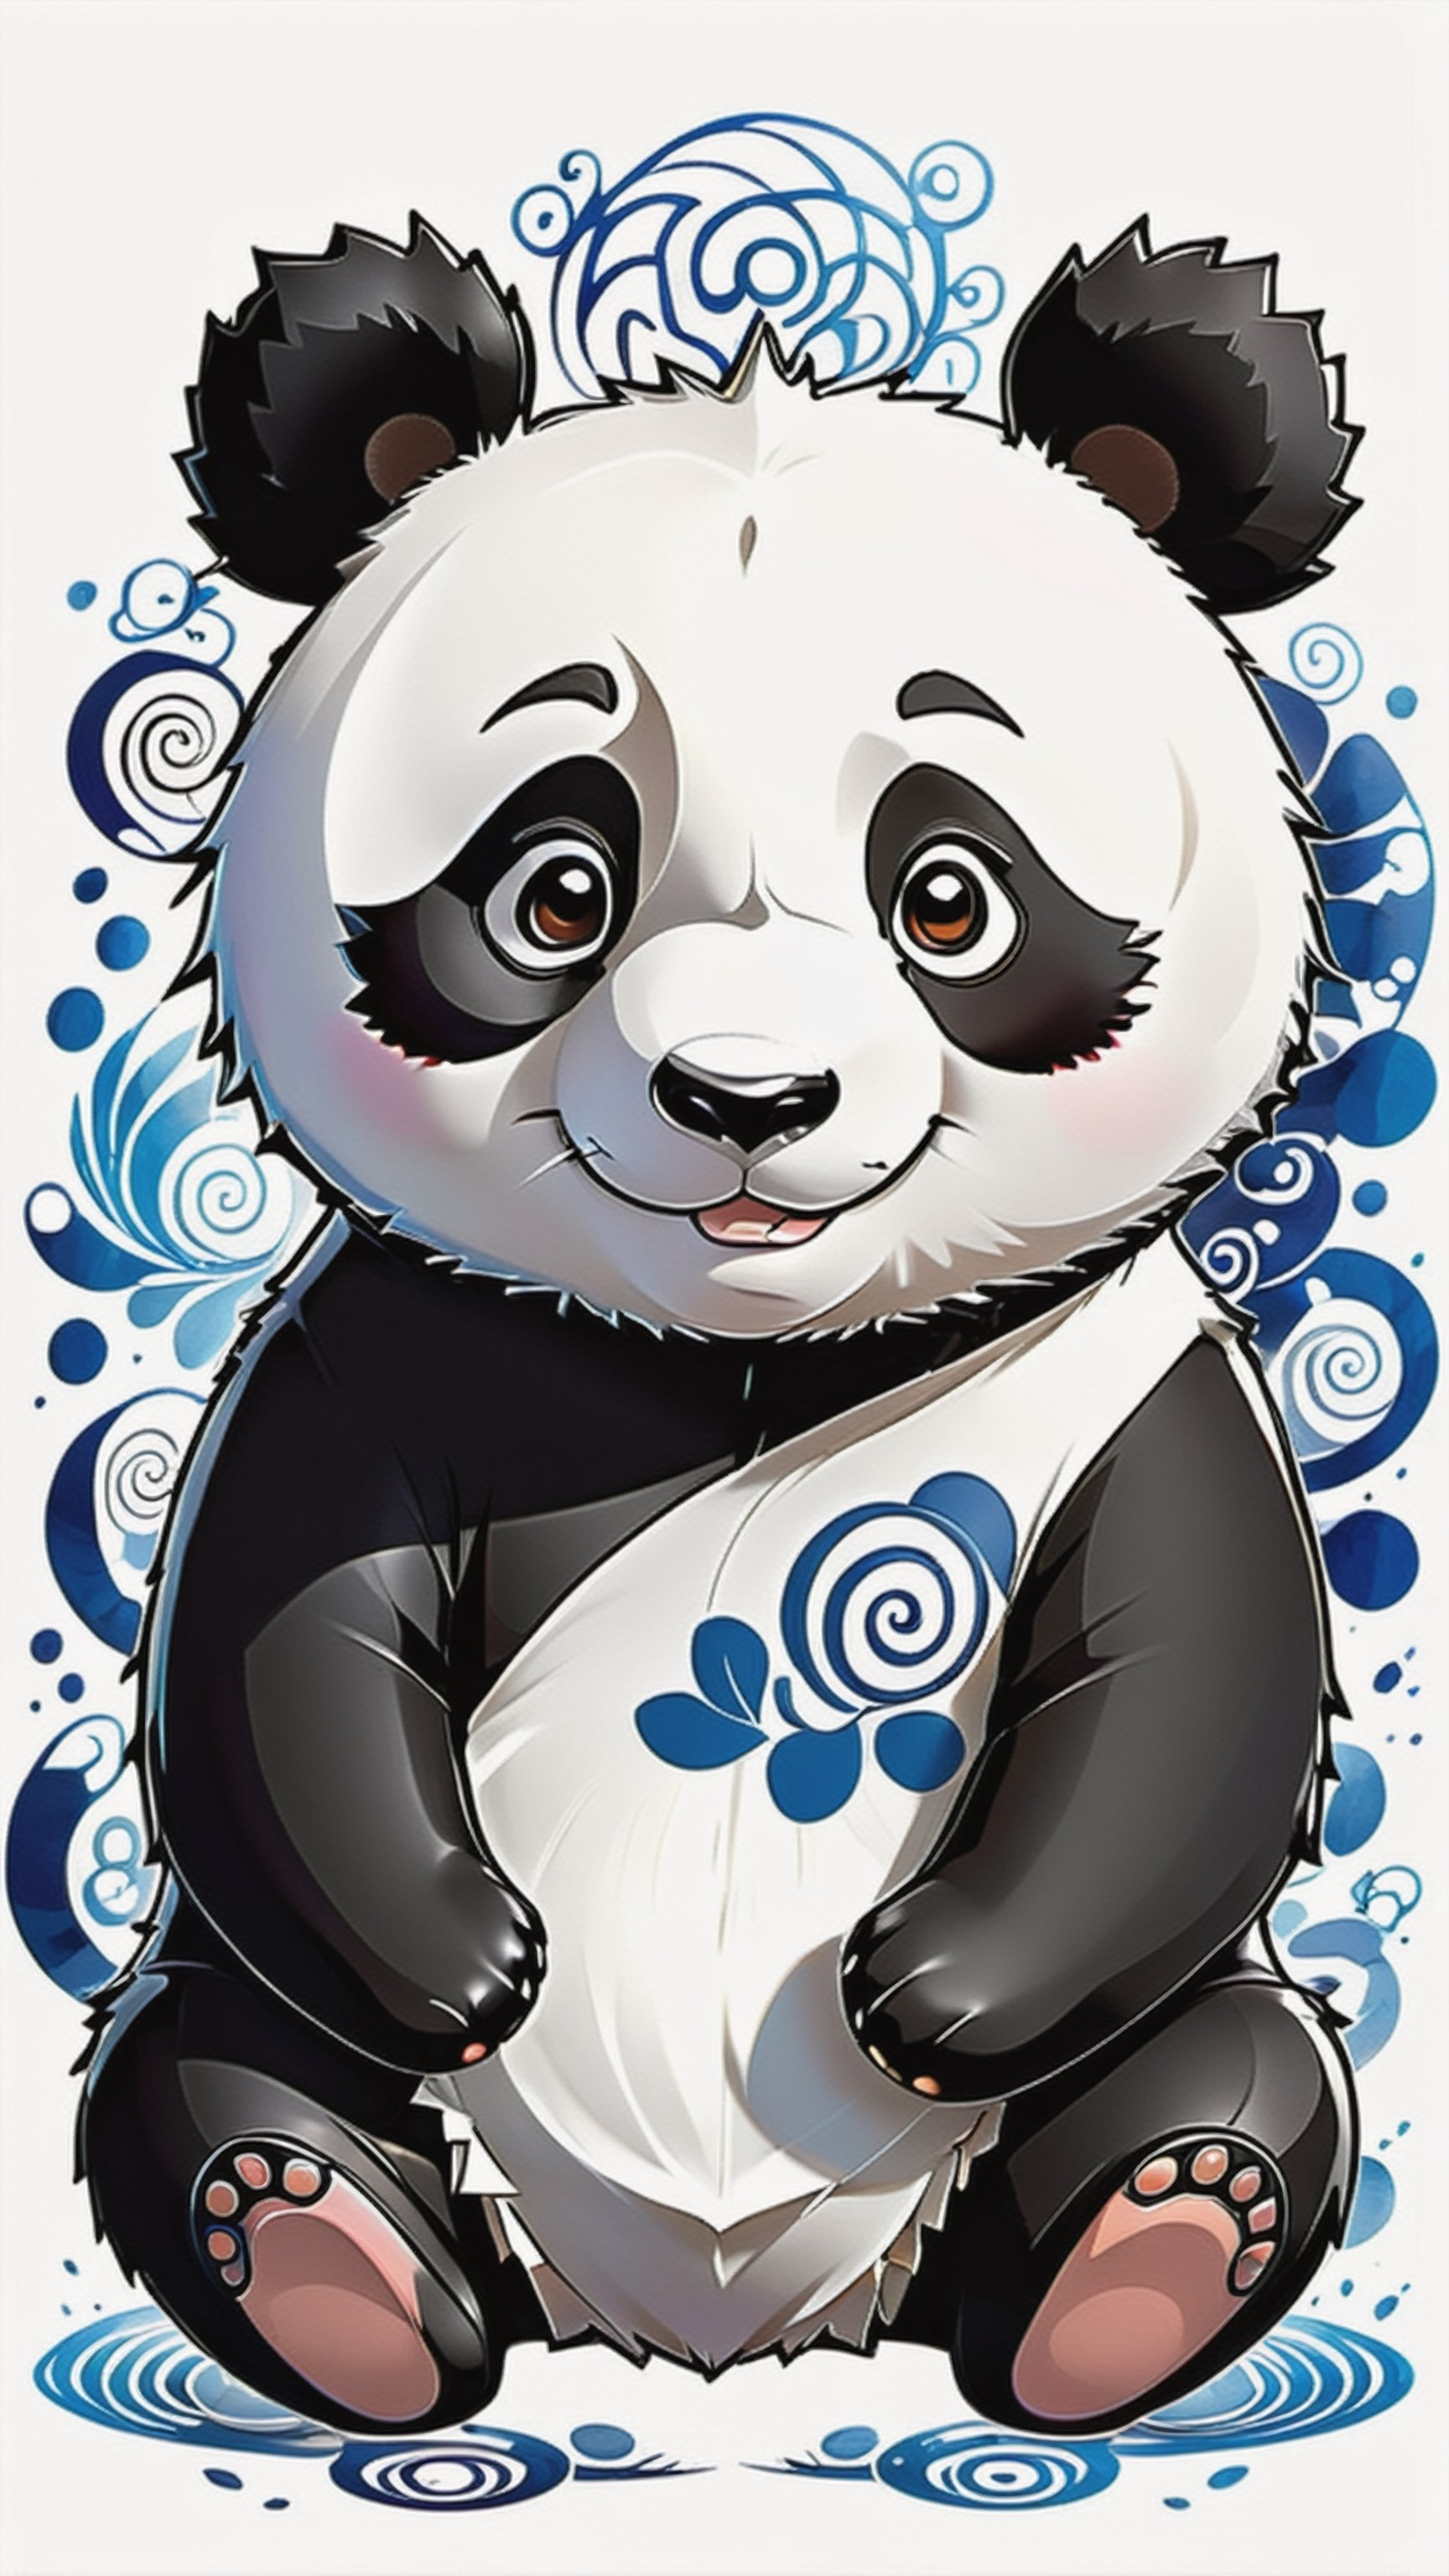 A Panda Women's capricious illustration, a playful character from the Naruto Tenten series. The scene takes place on a white background. The work of art is characterized by its intricate details, which shows the delicate patterns of the mouth mouth, mixture panda and the dynamic posture of the character. The style of the Enlightenment is influenced by the art of Kishimoto, the creator of Naruto, and incorporates manga and anime elements. Digital paint exhibits soft lines and rich colors, accentuating the energy and animated atmosphere. This attractive pet design captures the essence of Panda Man and Tenten, creating a lovely and striking work of art.
(((only the character on white background: 1 9)))